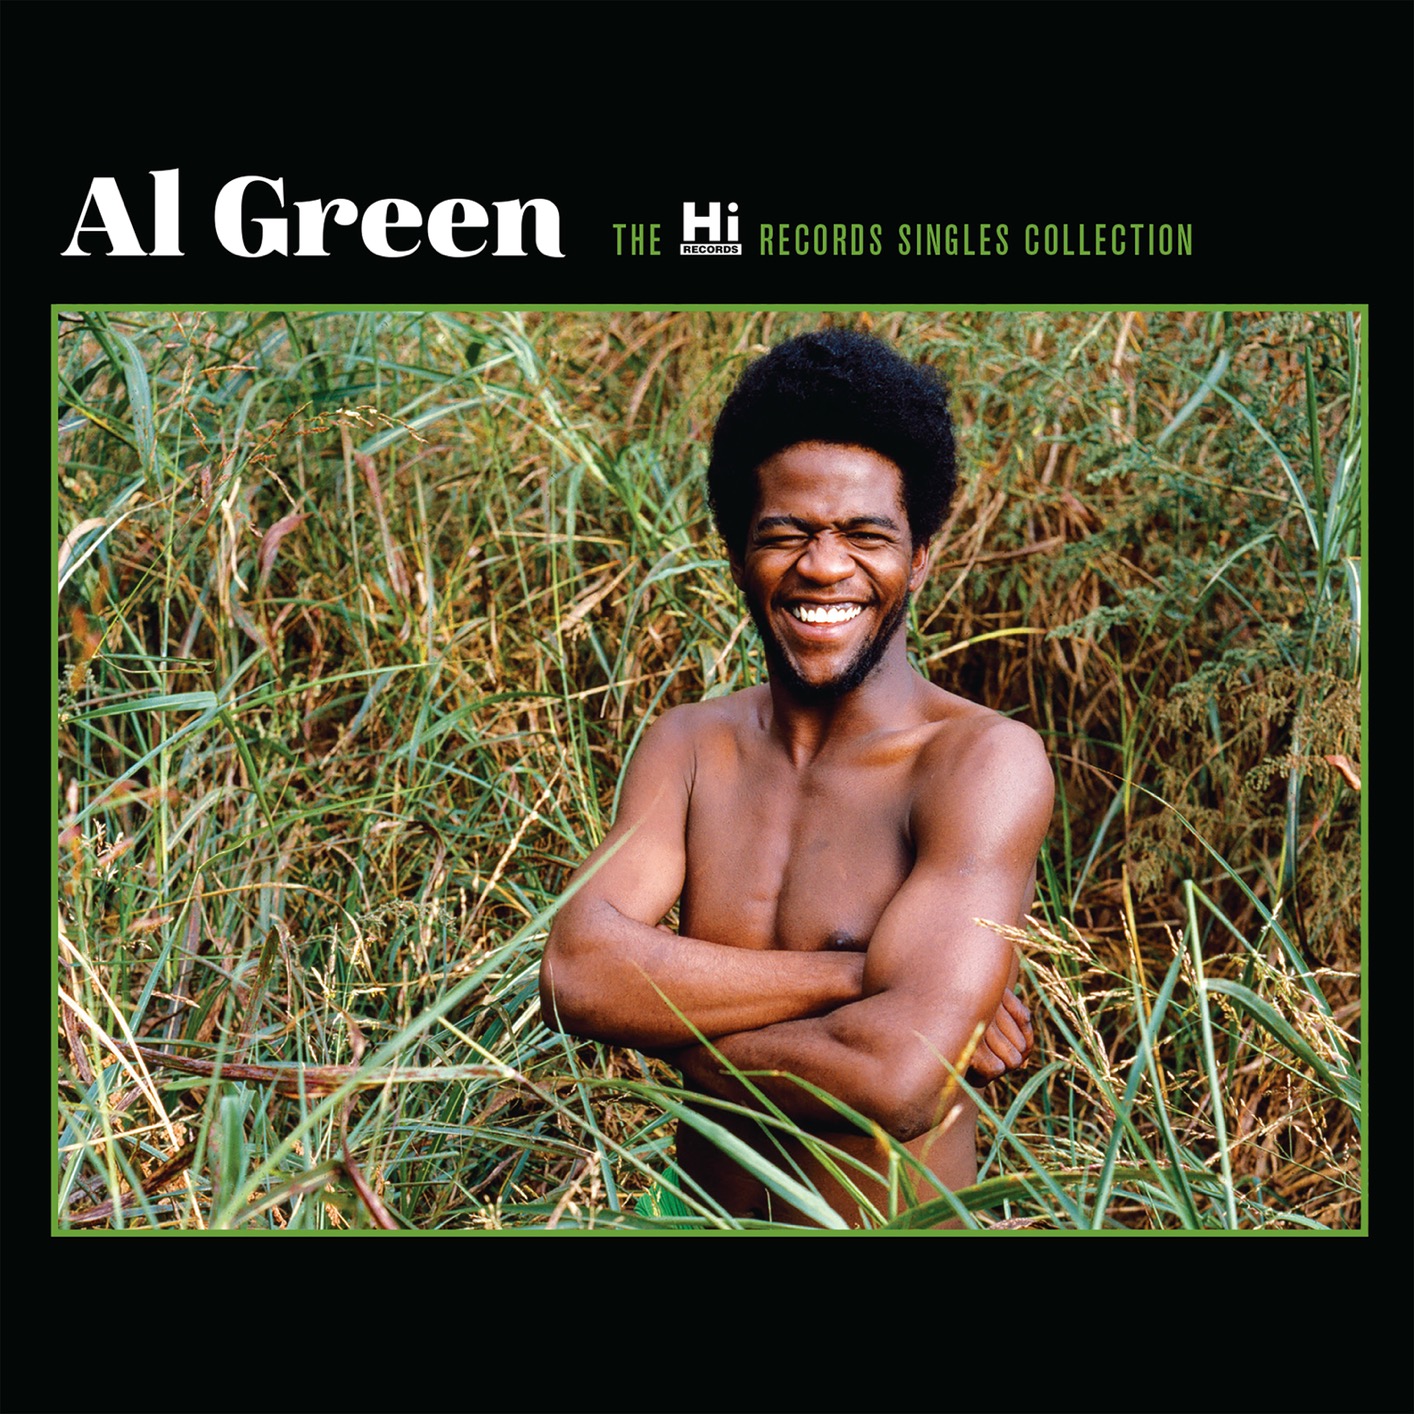 Al Green – The Hi Records Singles Collection (Remastered) (2018/2019) [FLAC 24bit/96kHz]